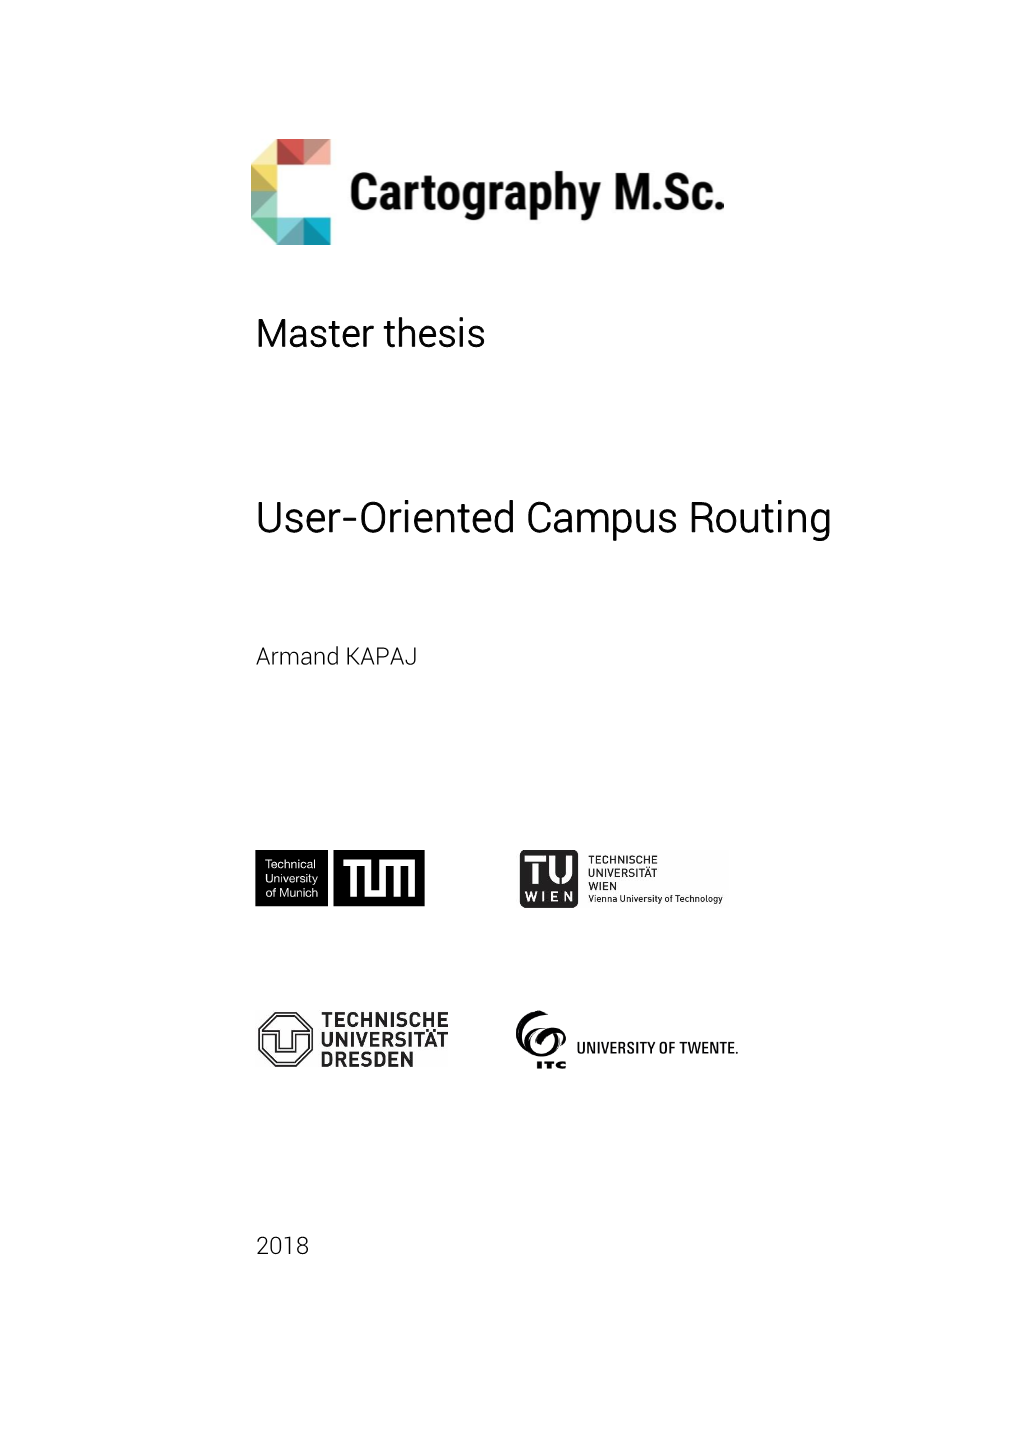 User-Oriented Campus Routing